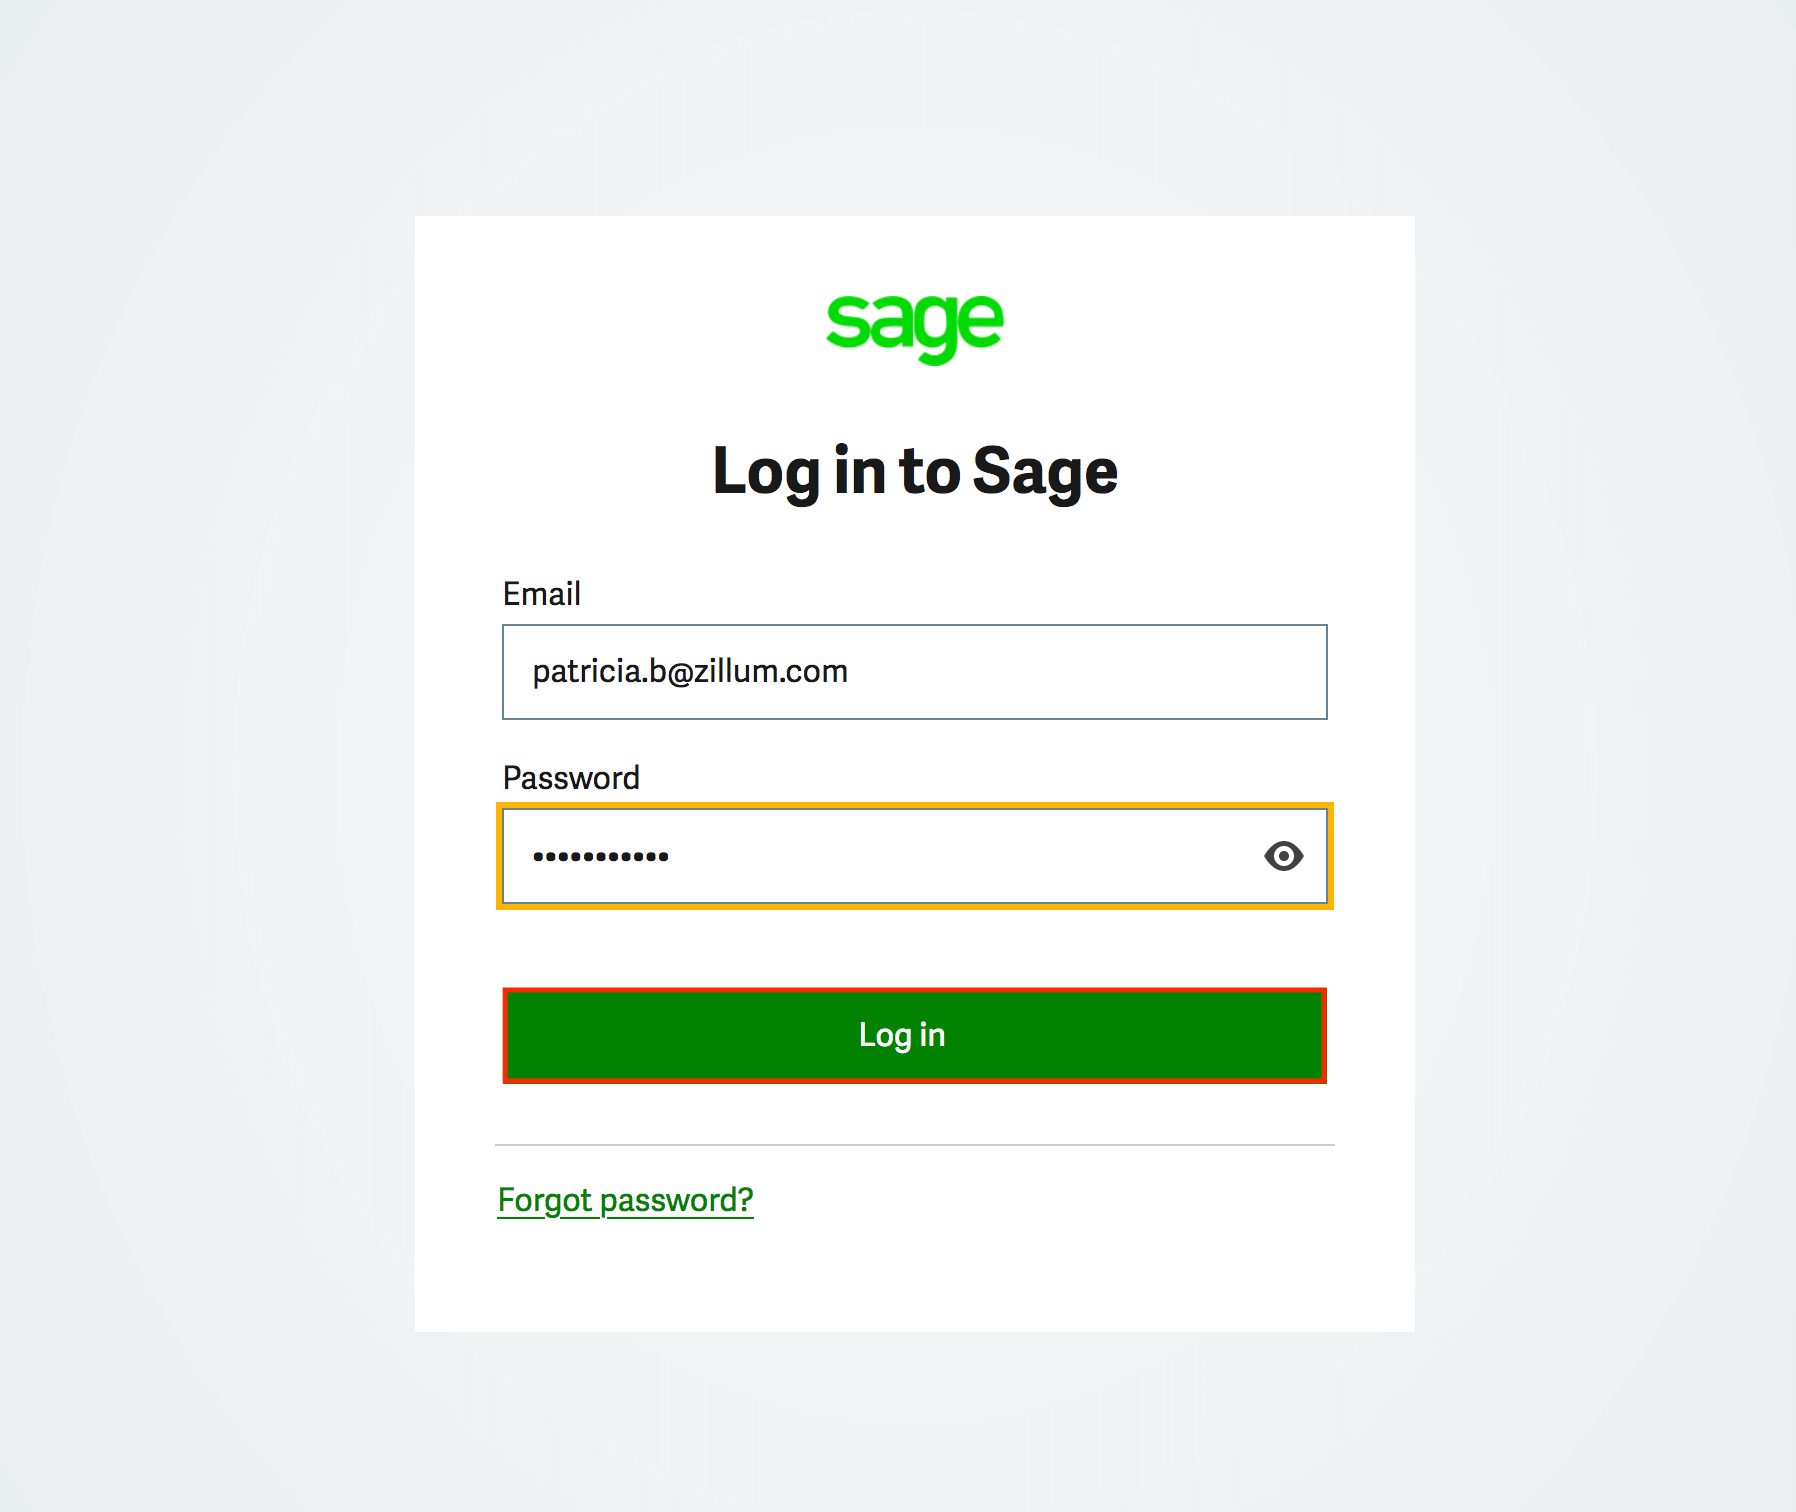 Connect to Sage Accounting